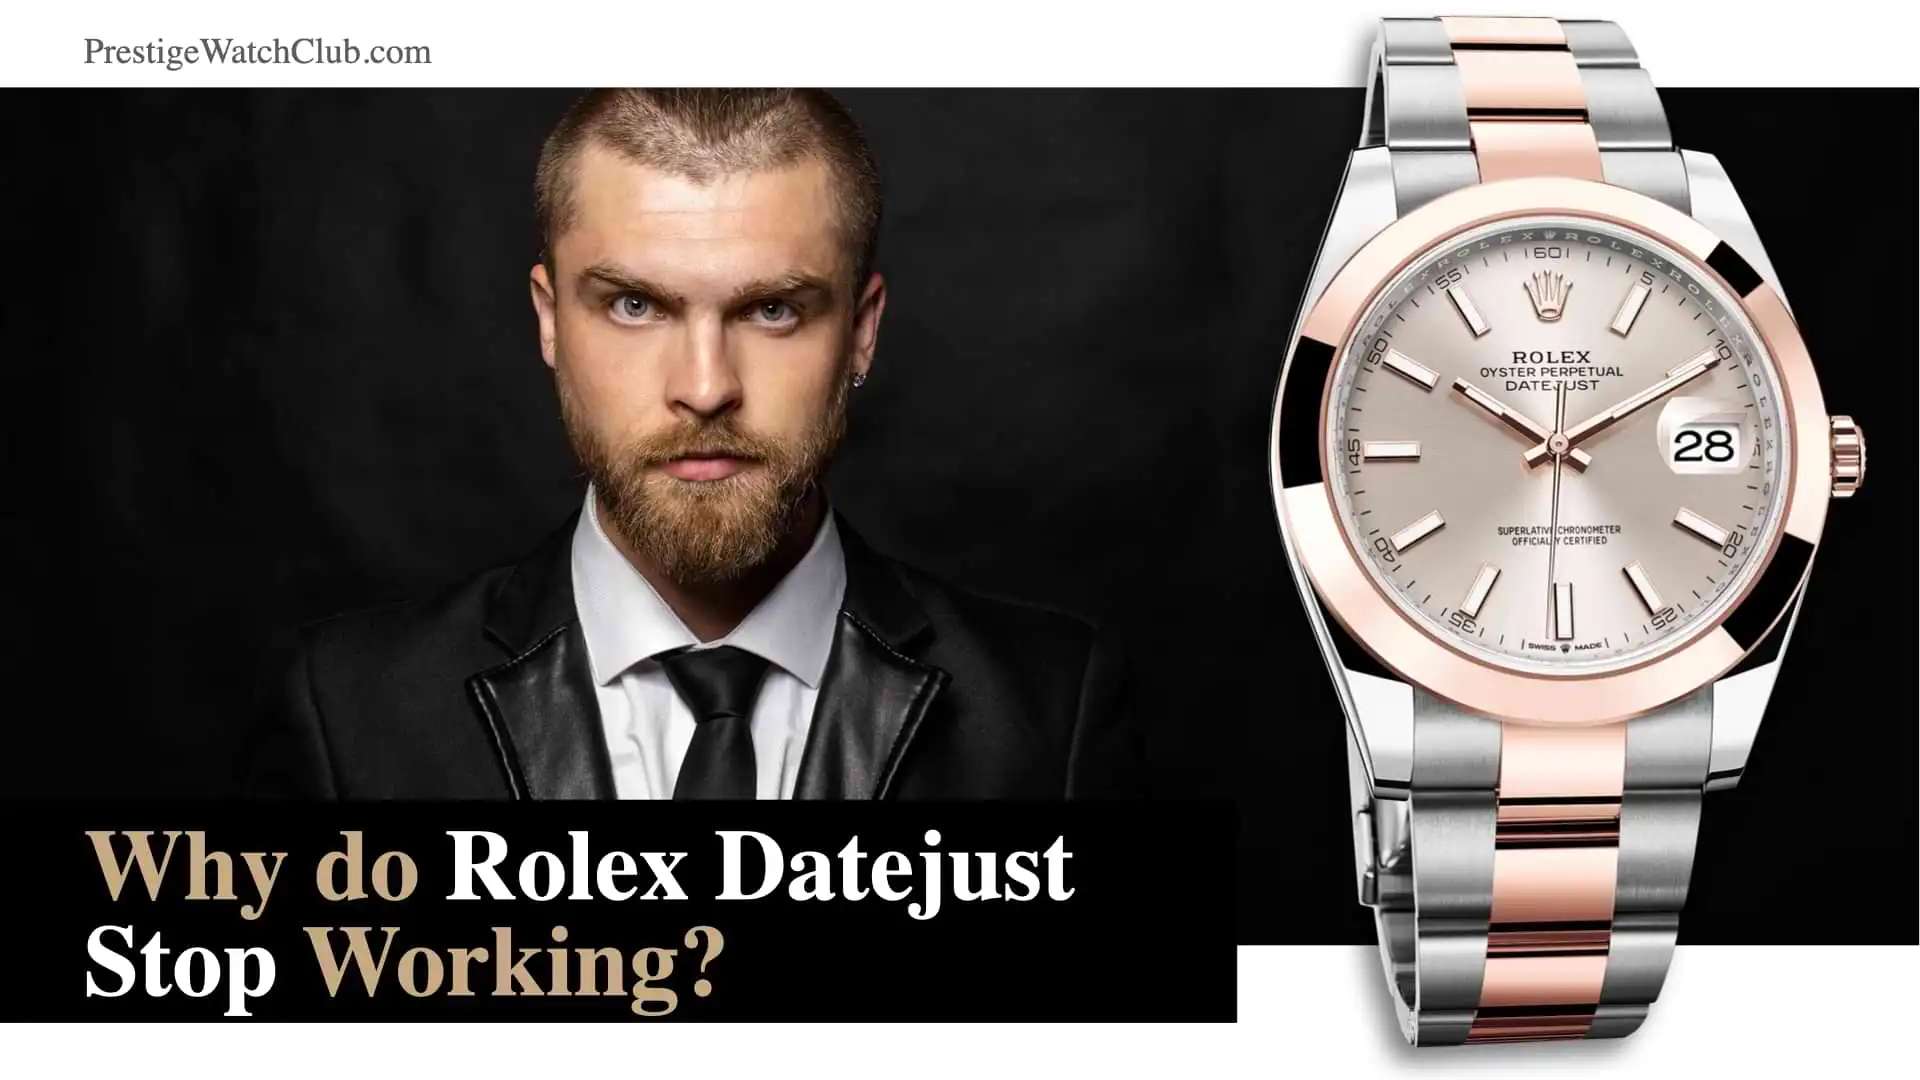 Why do Rolex Datejust Stop Working